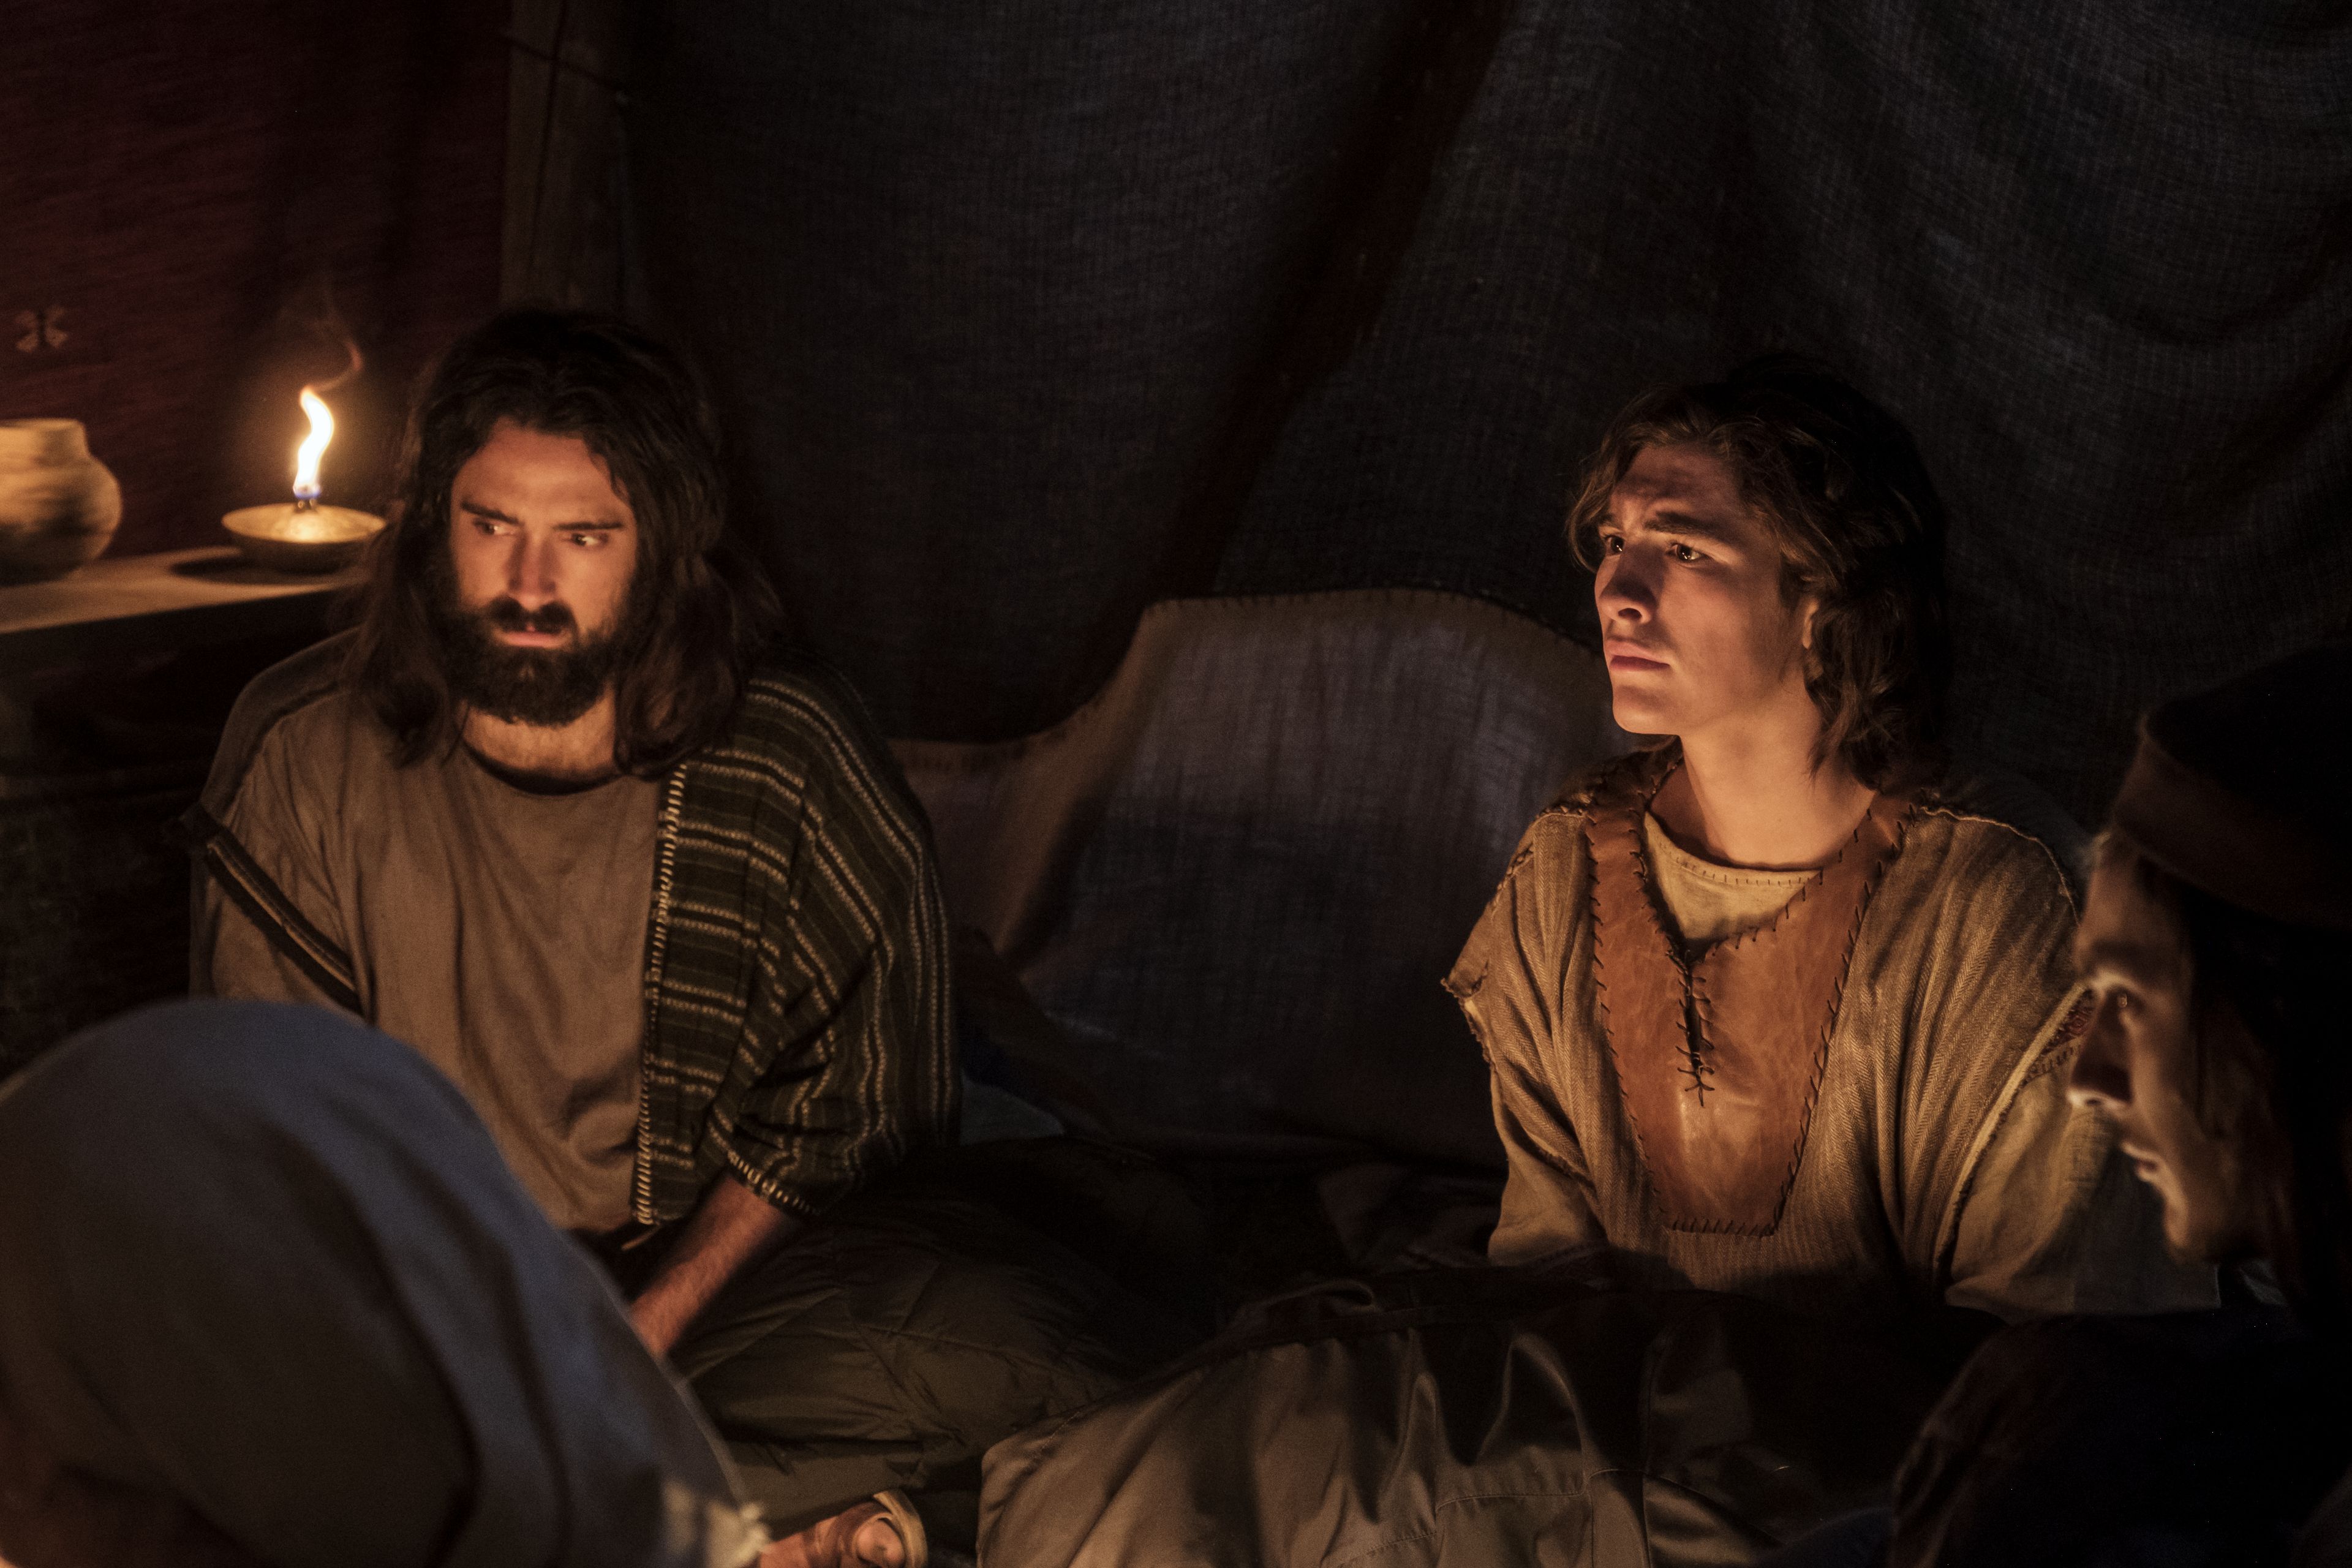 Nephi and Lemuel listen as Lehi tells his family about his vision of the tree of life.